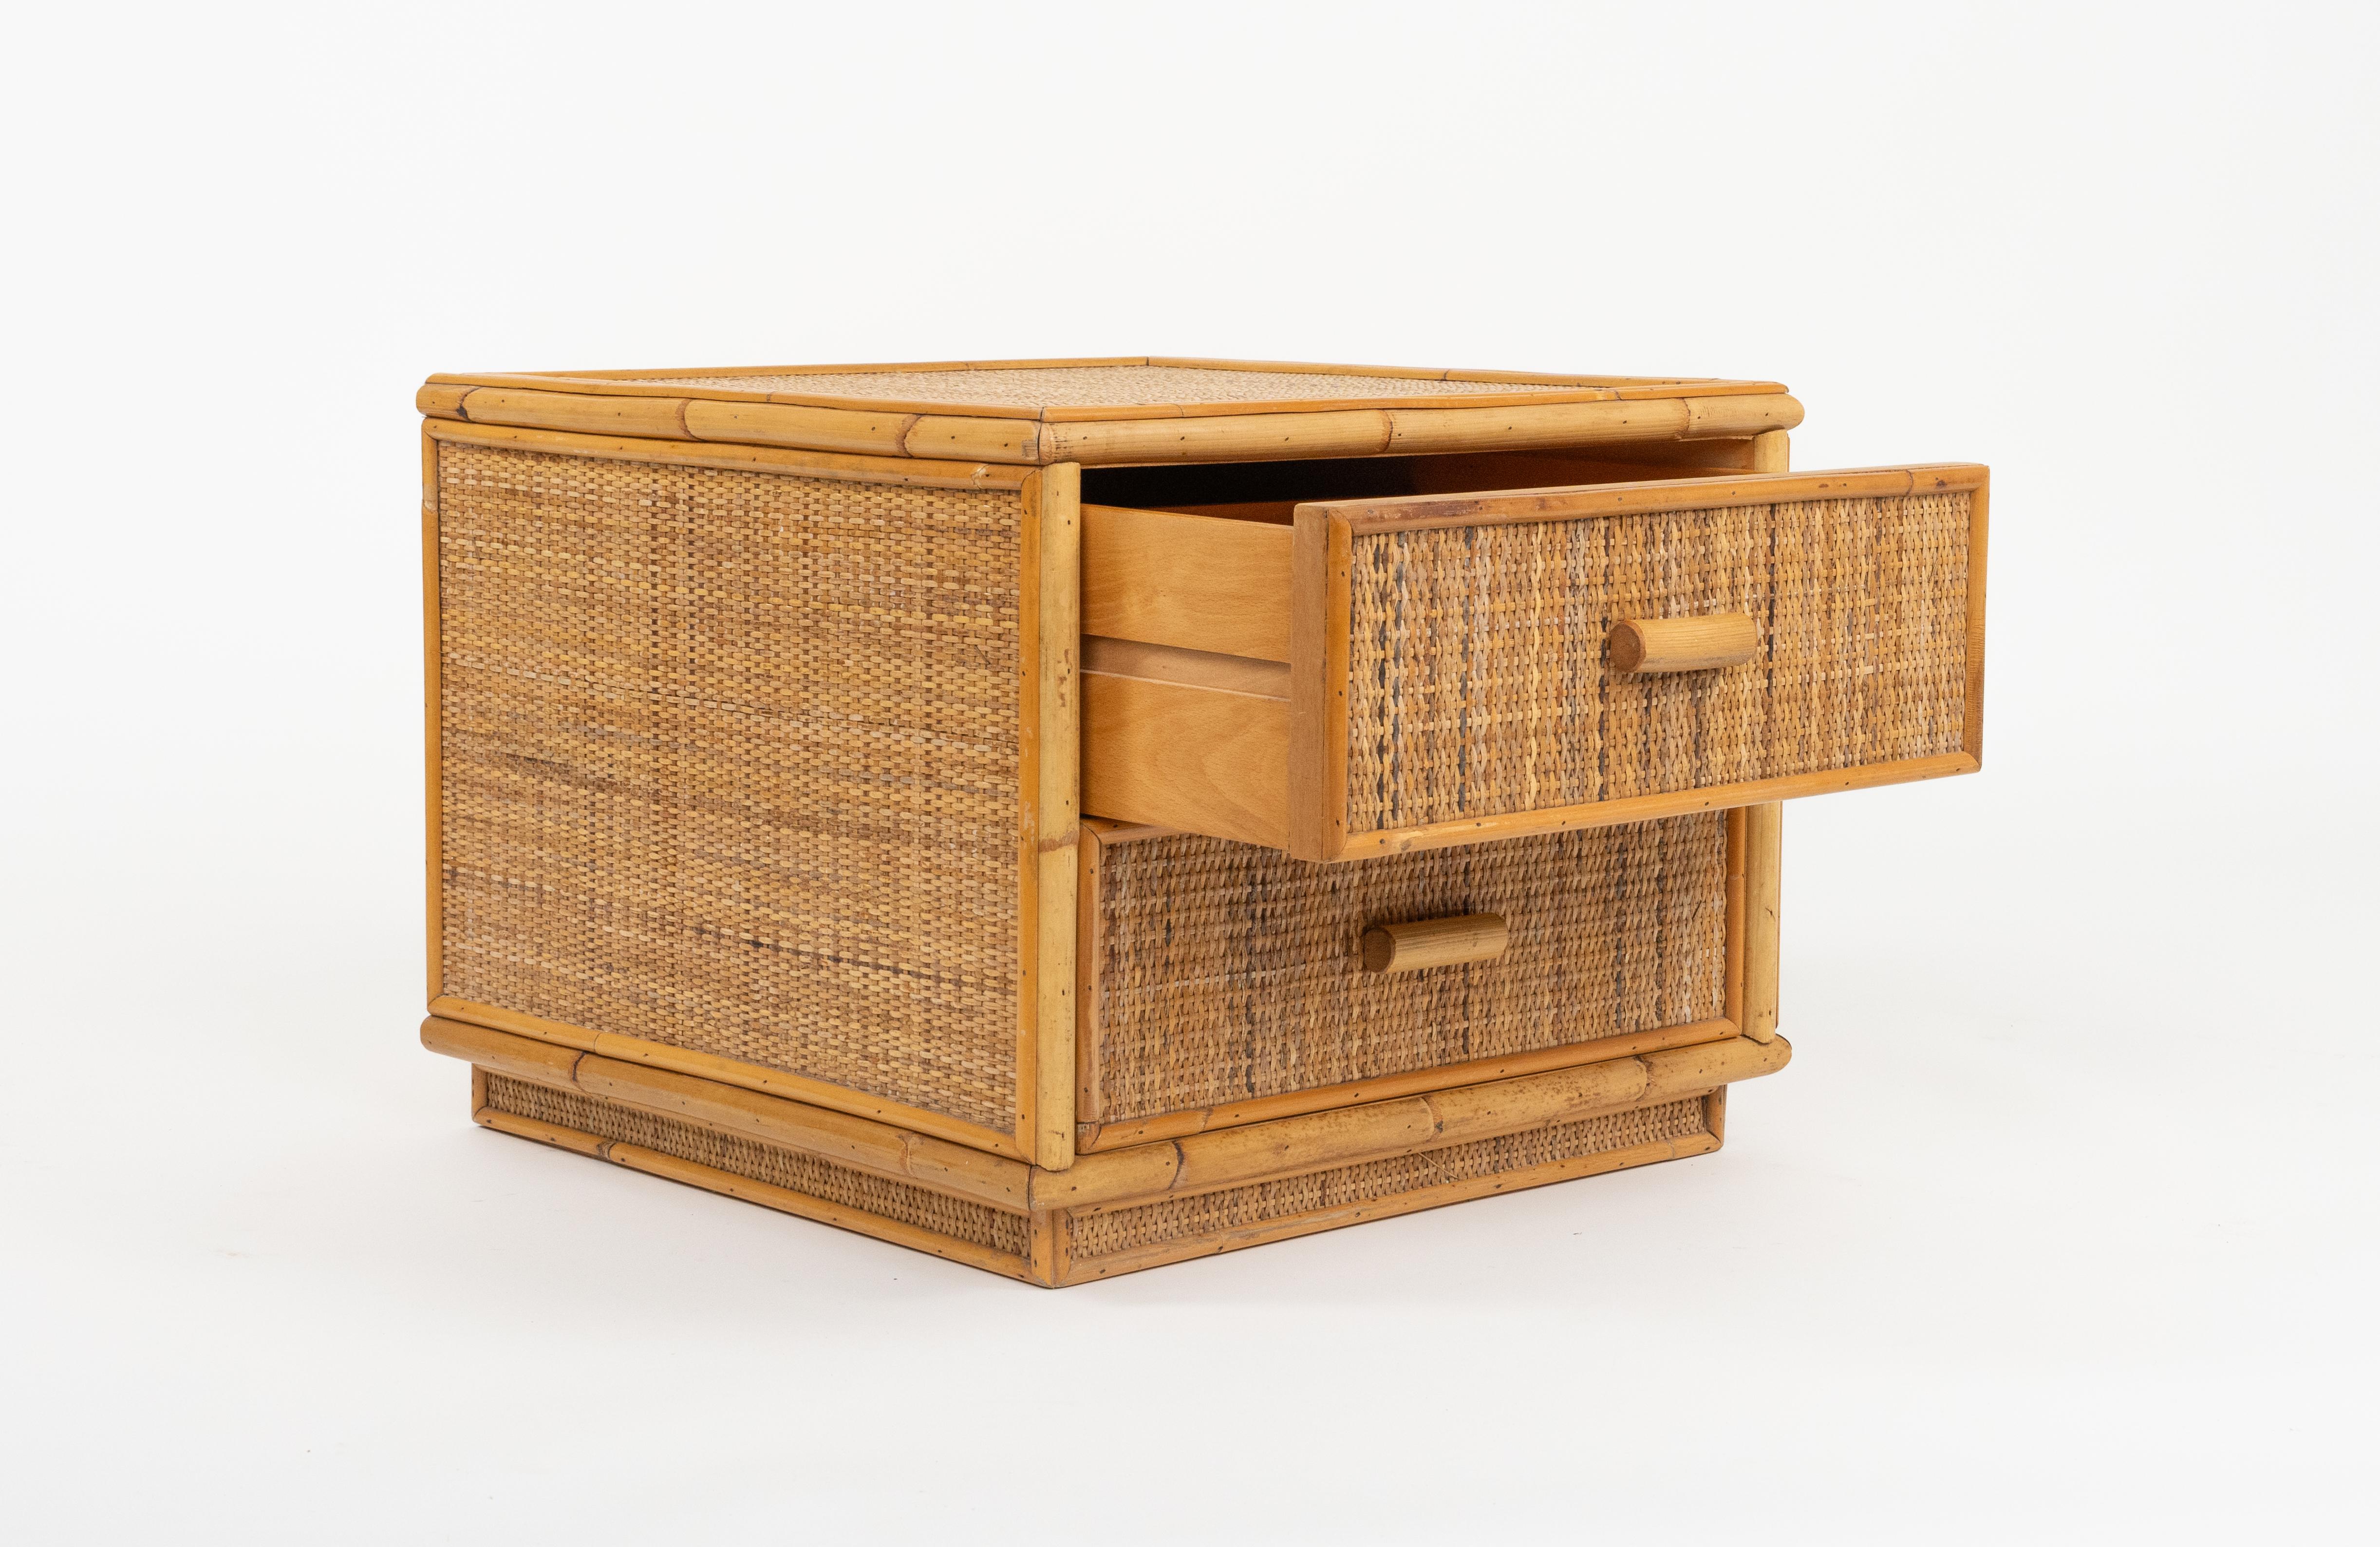 Bamboo and Rattan Pair of Bedside Tables Nightstands Dal Vera Style, Italy 1970s For Sale 5